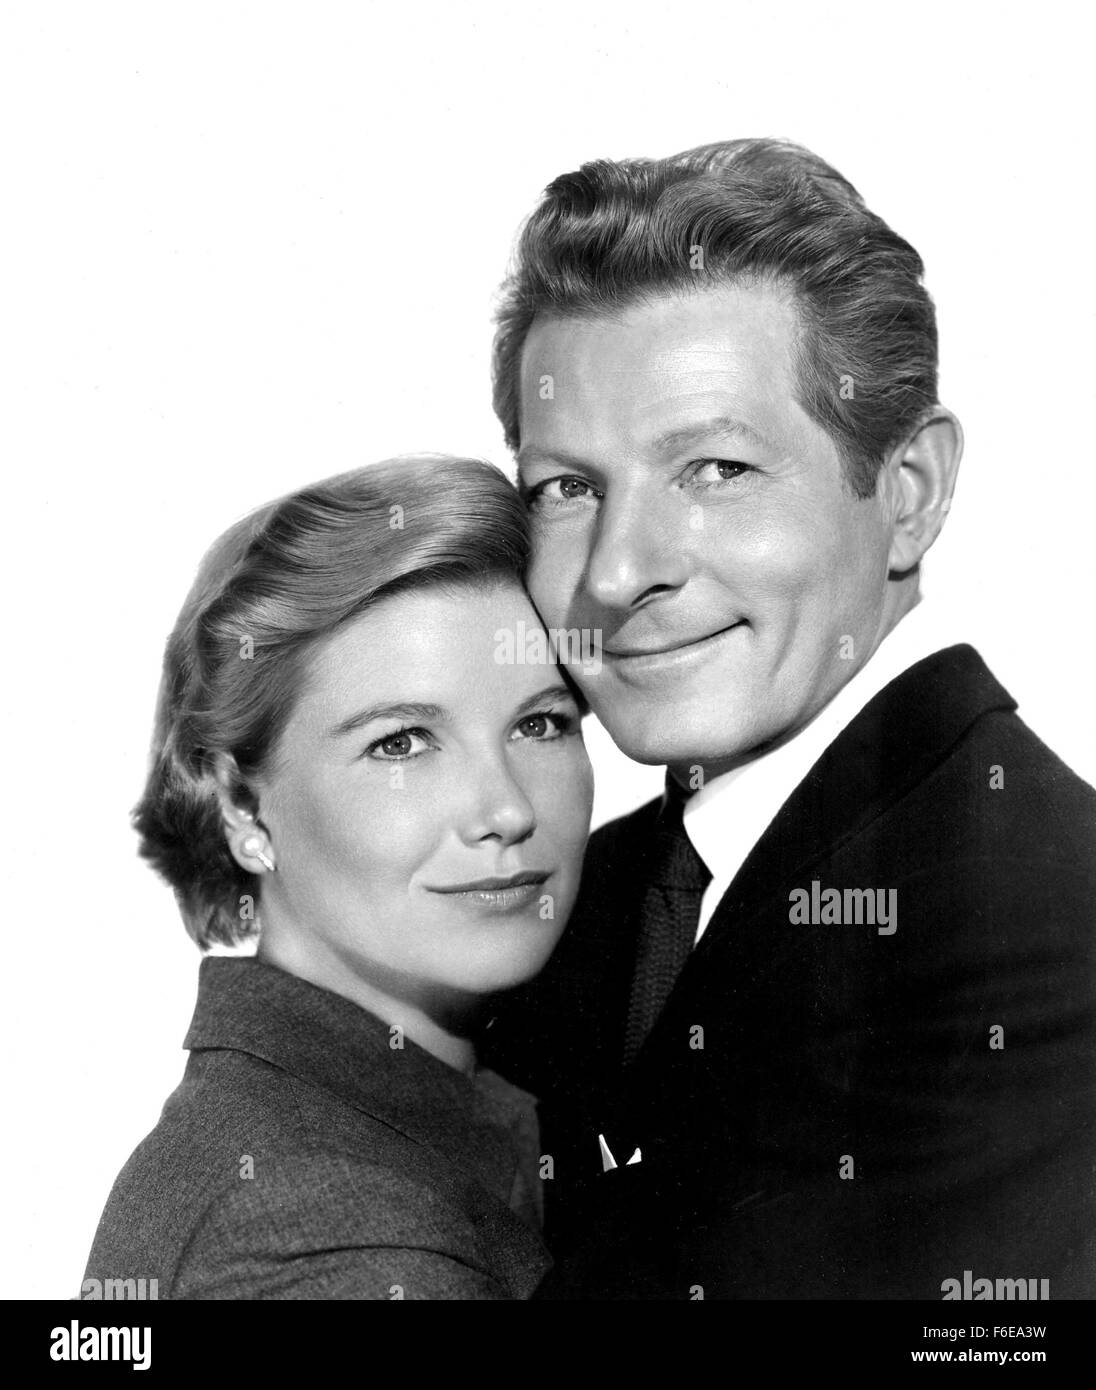 Jan 01, 1959; [Exact Date and Location Unknown]; DANNY KAYE and BARBARA BEL GEDDES as his wfe in the 1959 film ''The Five Pennies.'' Stock Photo